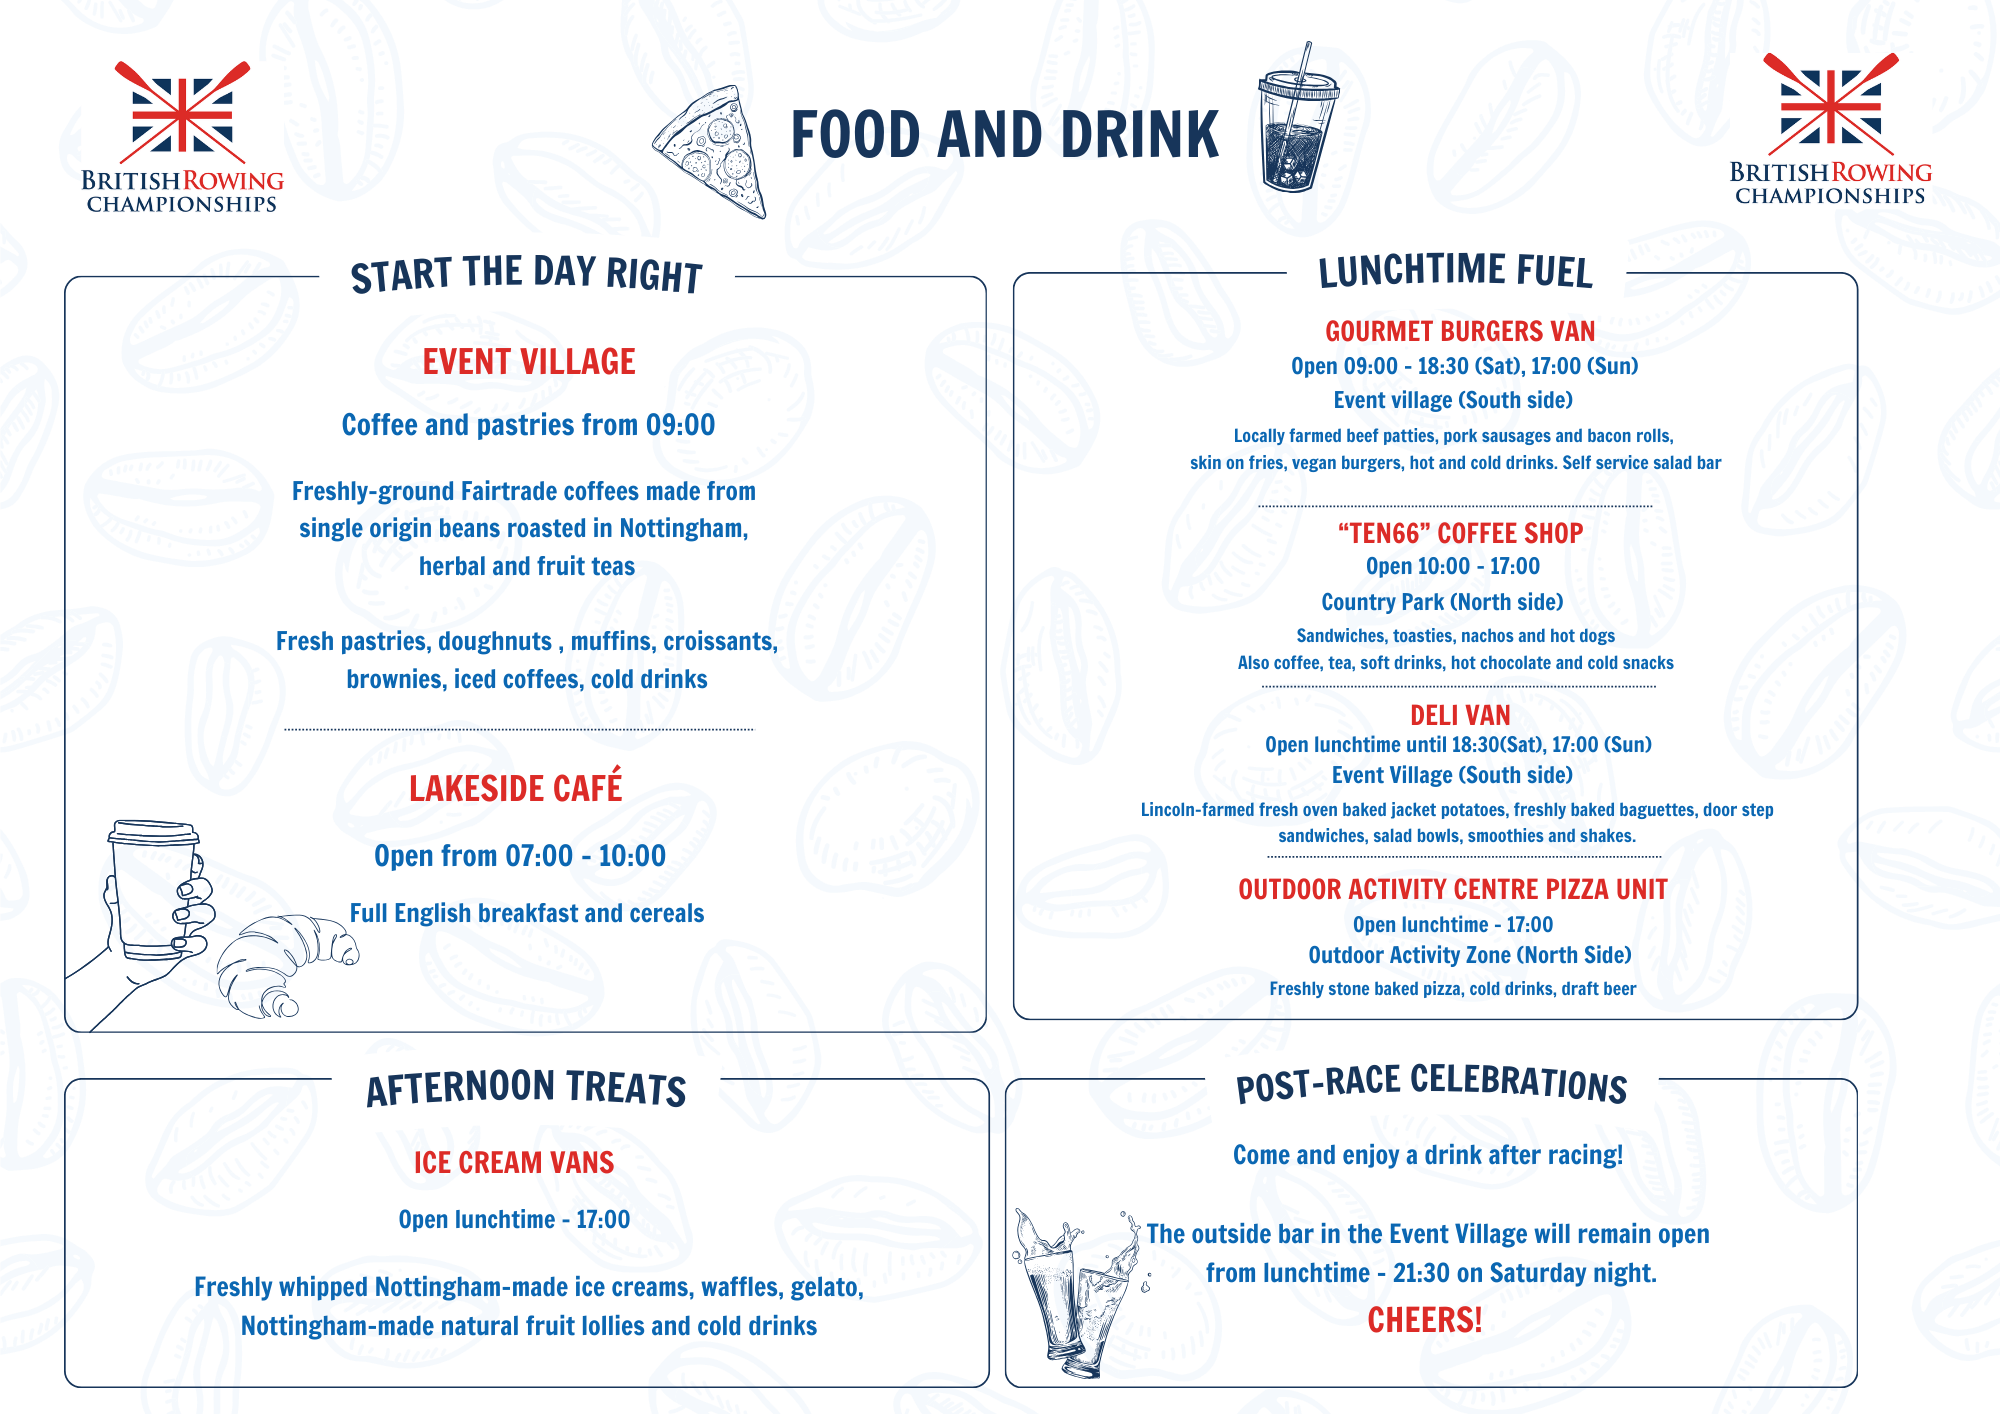 Food and drink options